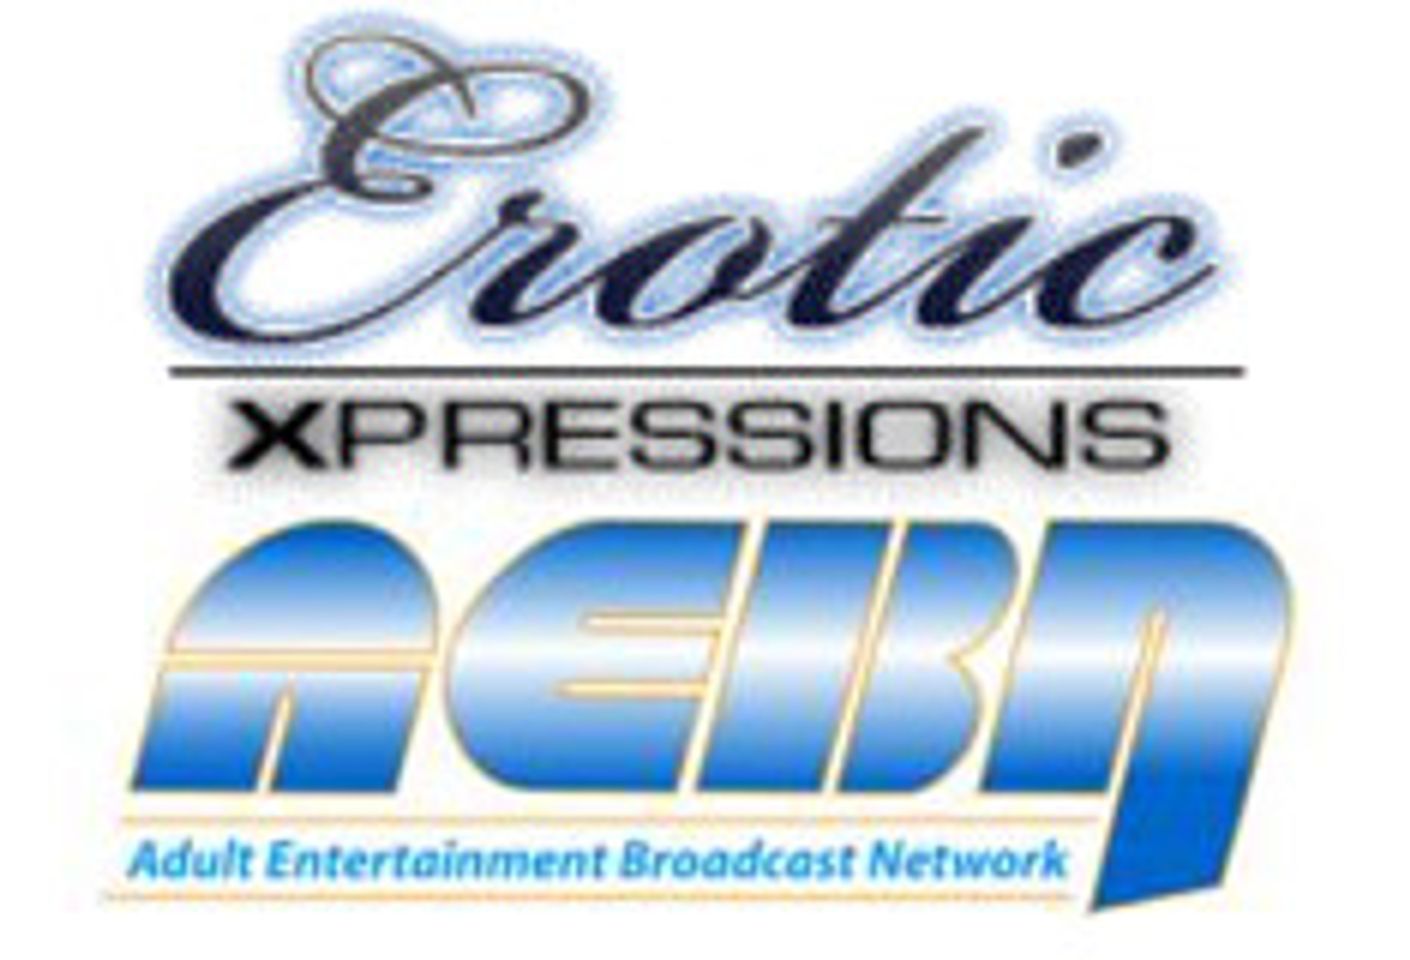 AEBN Brings Erotic Stories to iPod with Erotic Xpressions